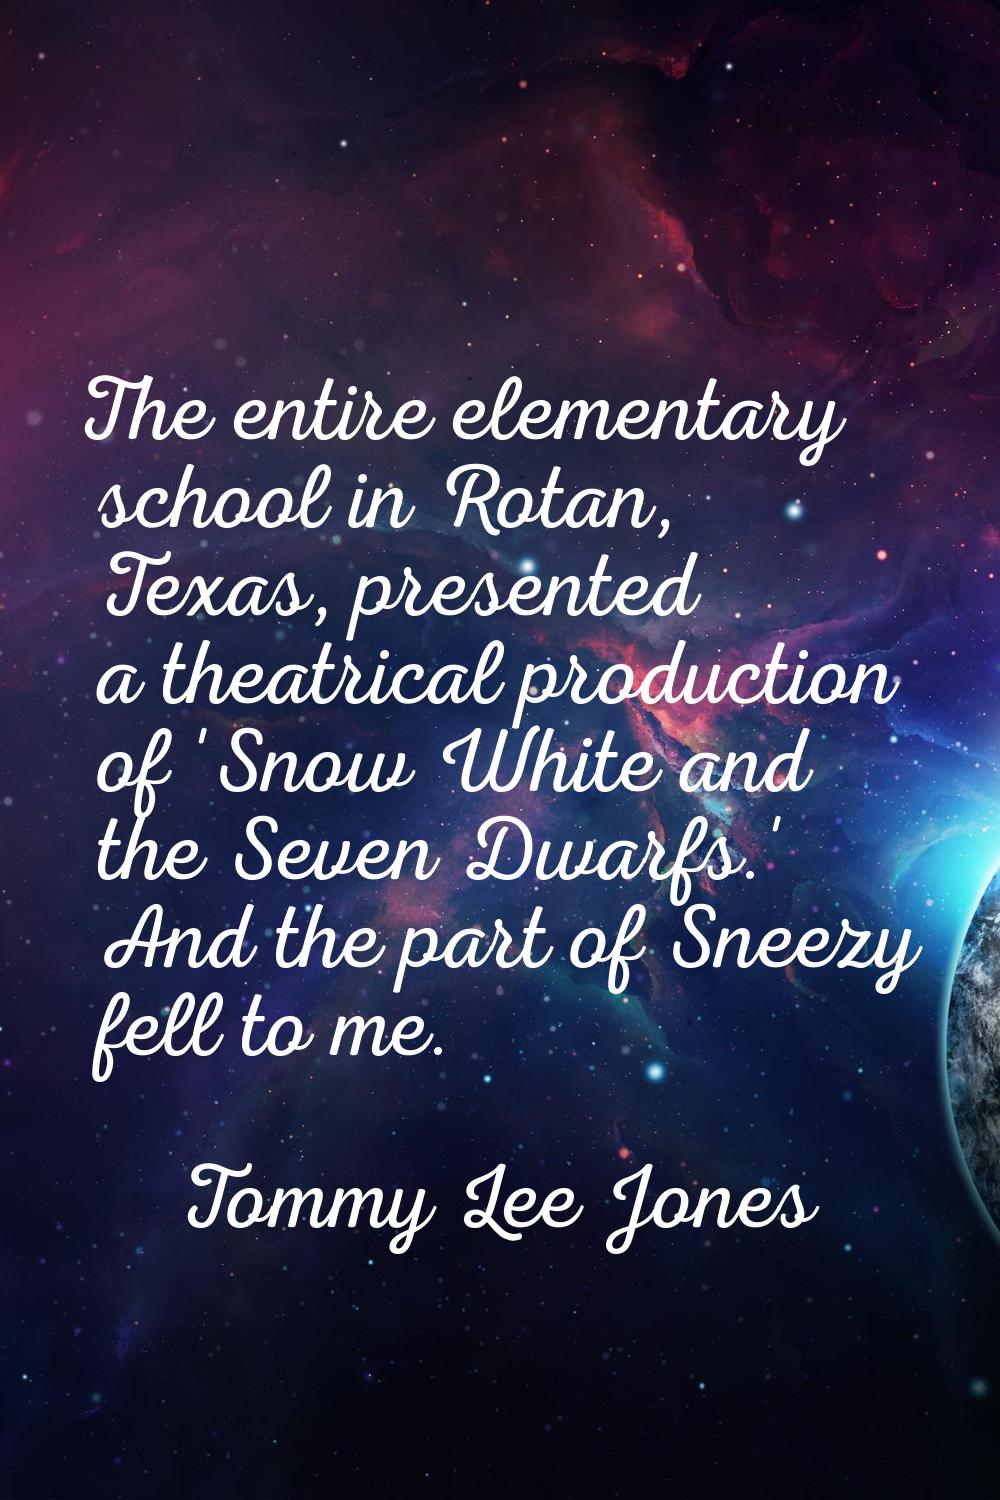 The entire elementary school in Rotan, Texas, presented a theatrical production of 'Snow White and 